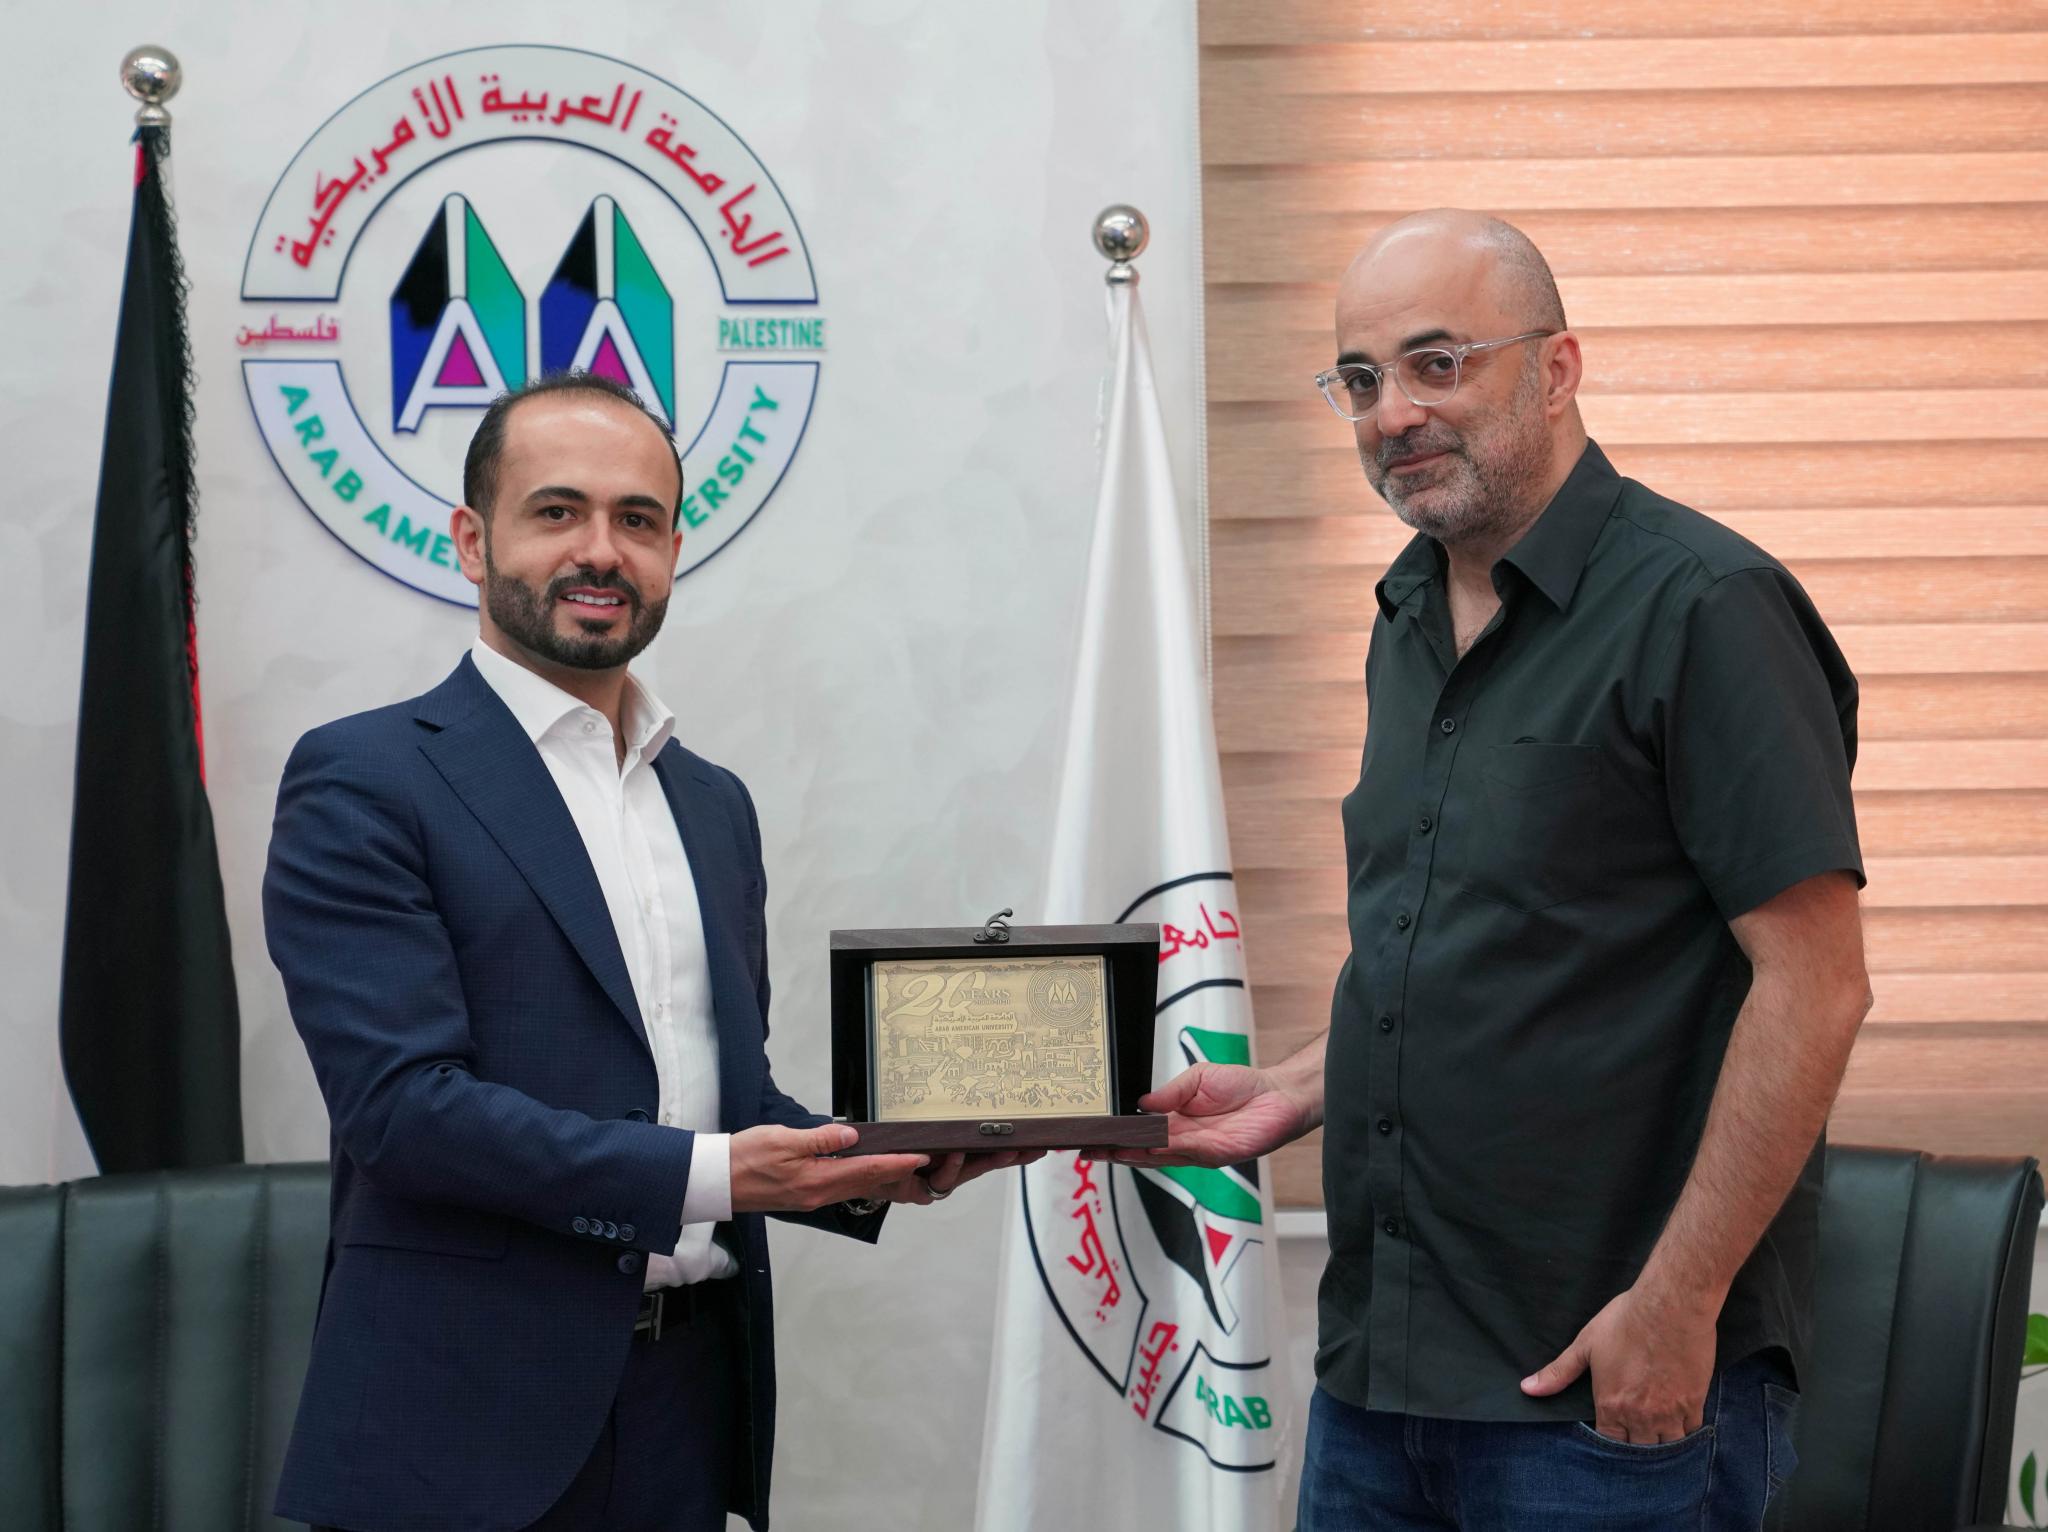 MoU Signing between AAUP and the Arab Center for the Advancement of Social Media